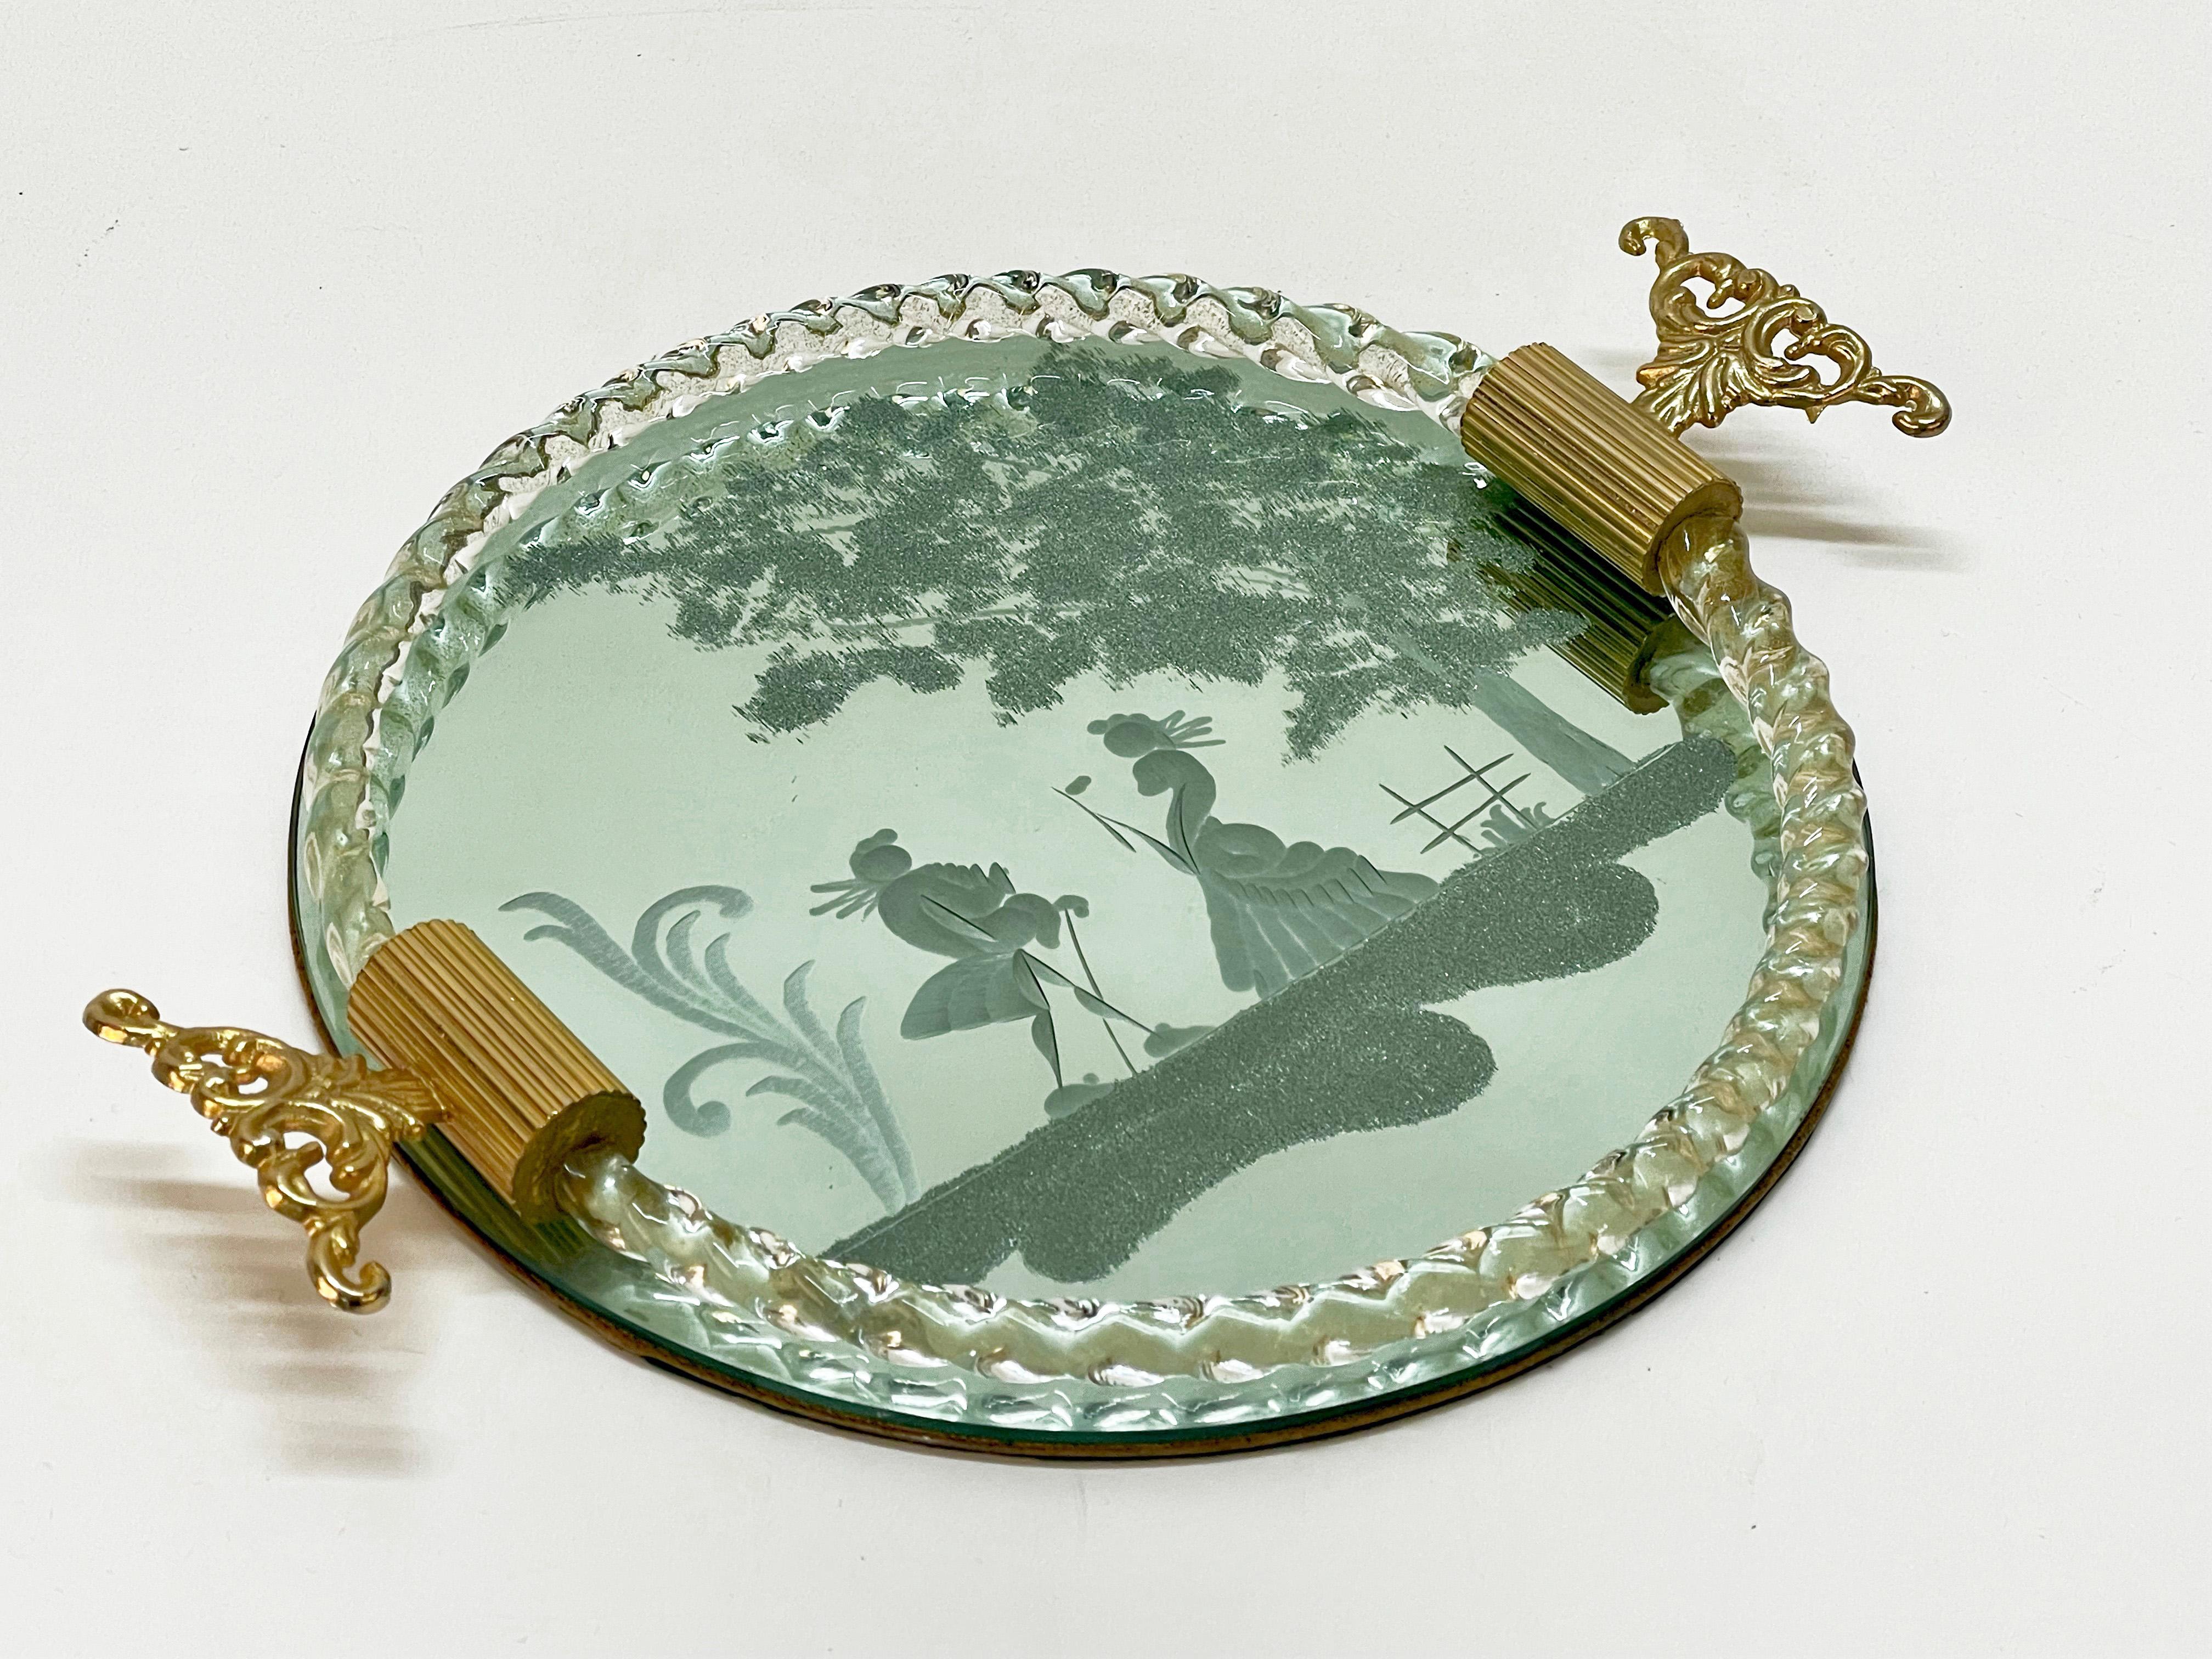 Ercole Barovier Mirror-Engraved Murano Glass Italian Serving Tray, 1940s For Sale 2